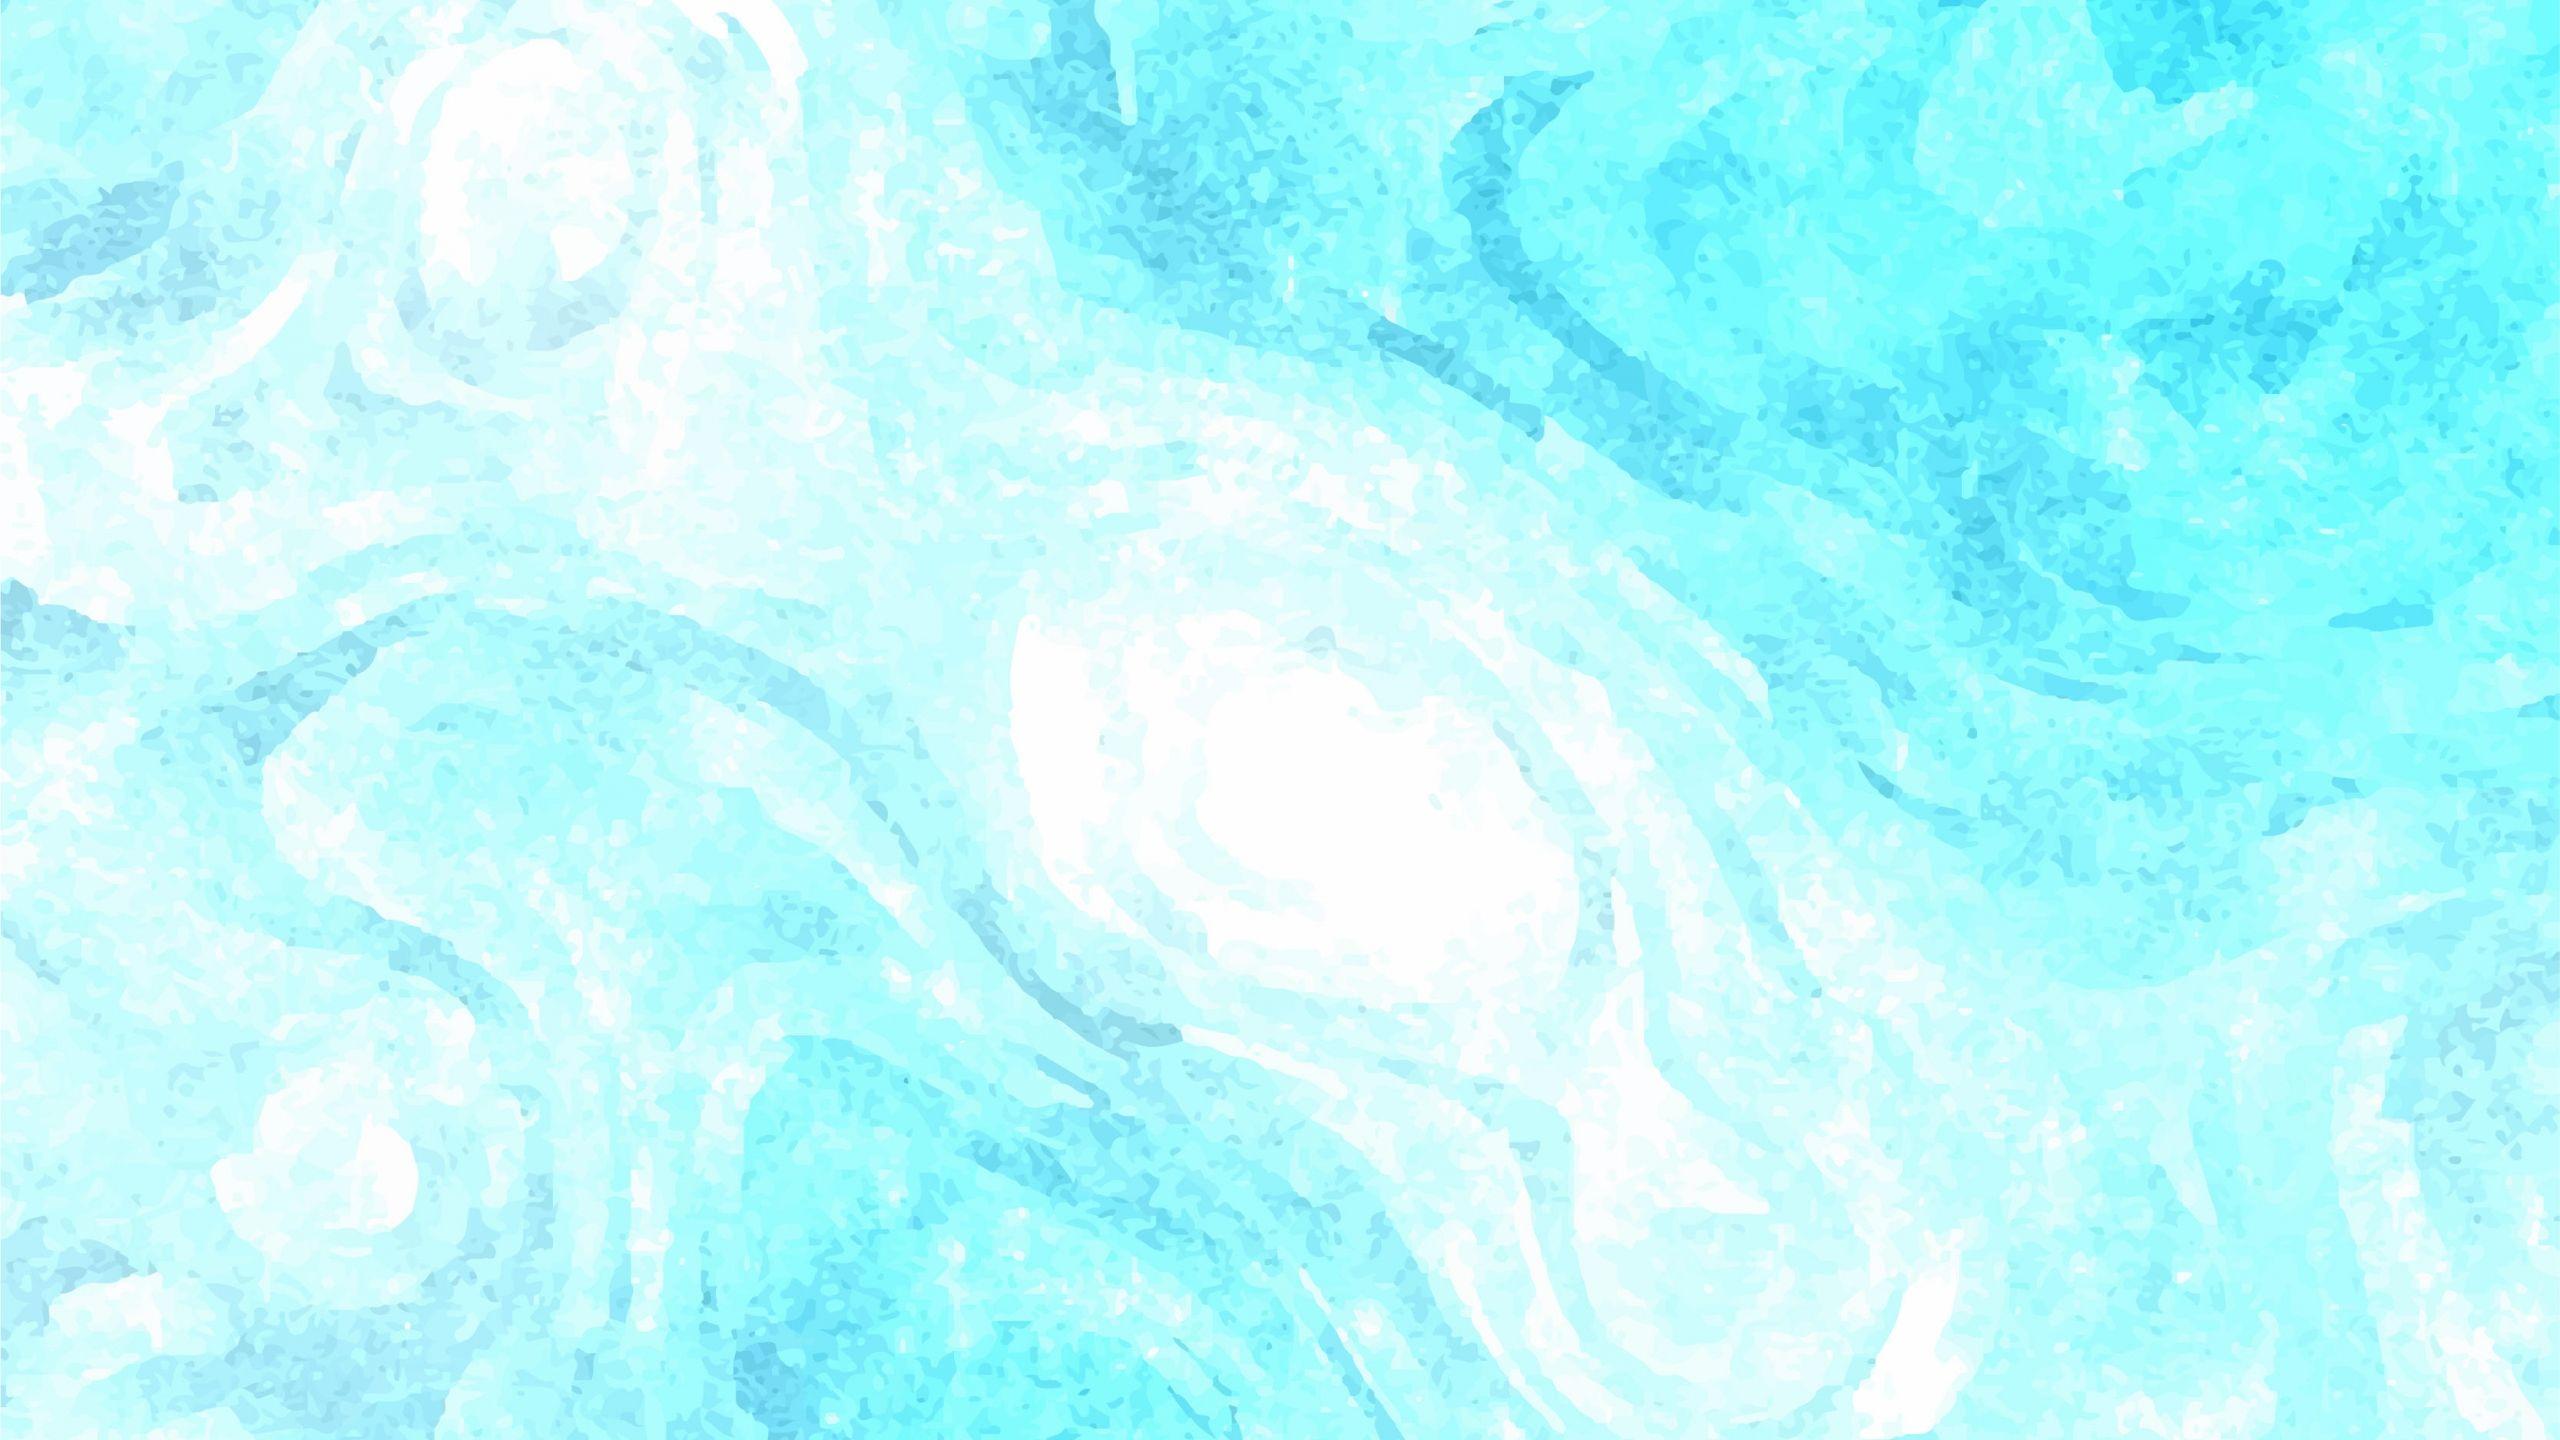 Teal Watercolor Wallpapers - Top Free Teal Watercolor Backgrounds ...